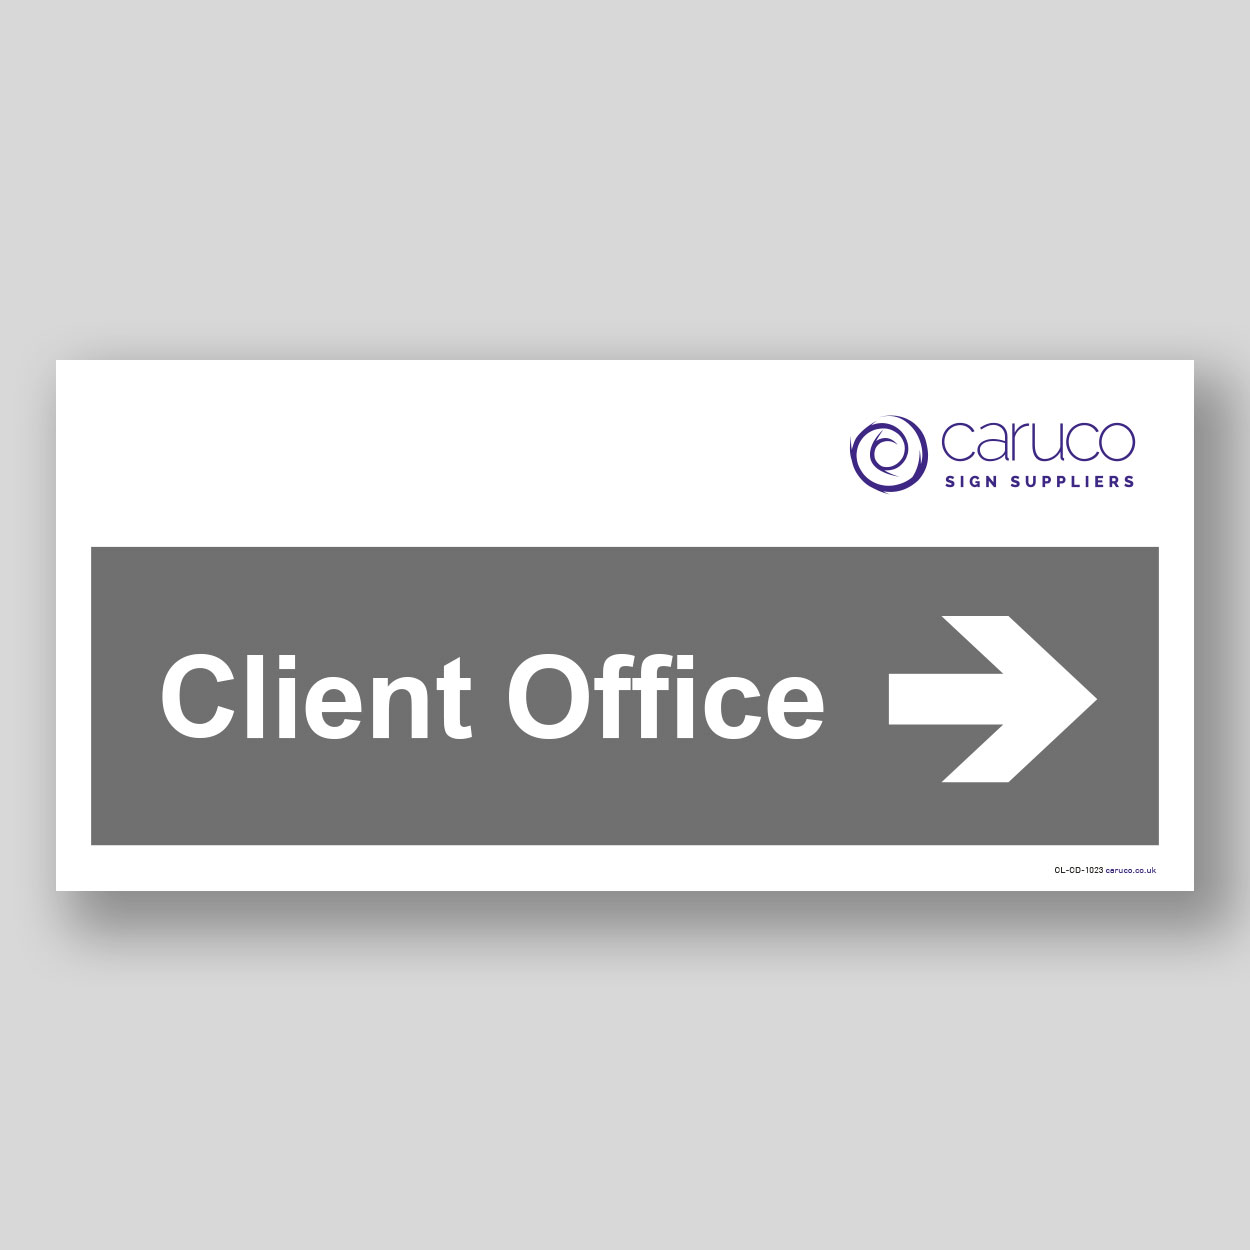 CL-CD-1023 Client office with right arrow